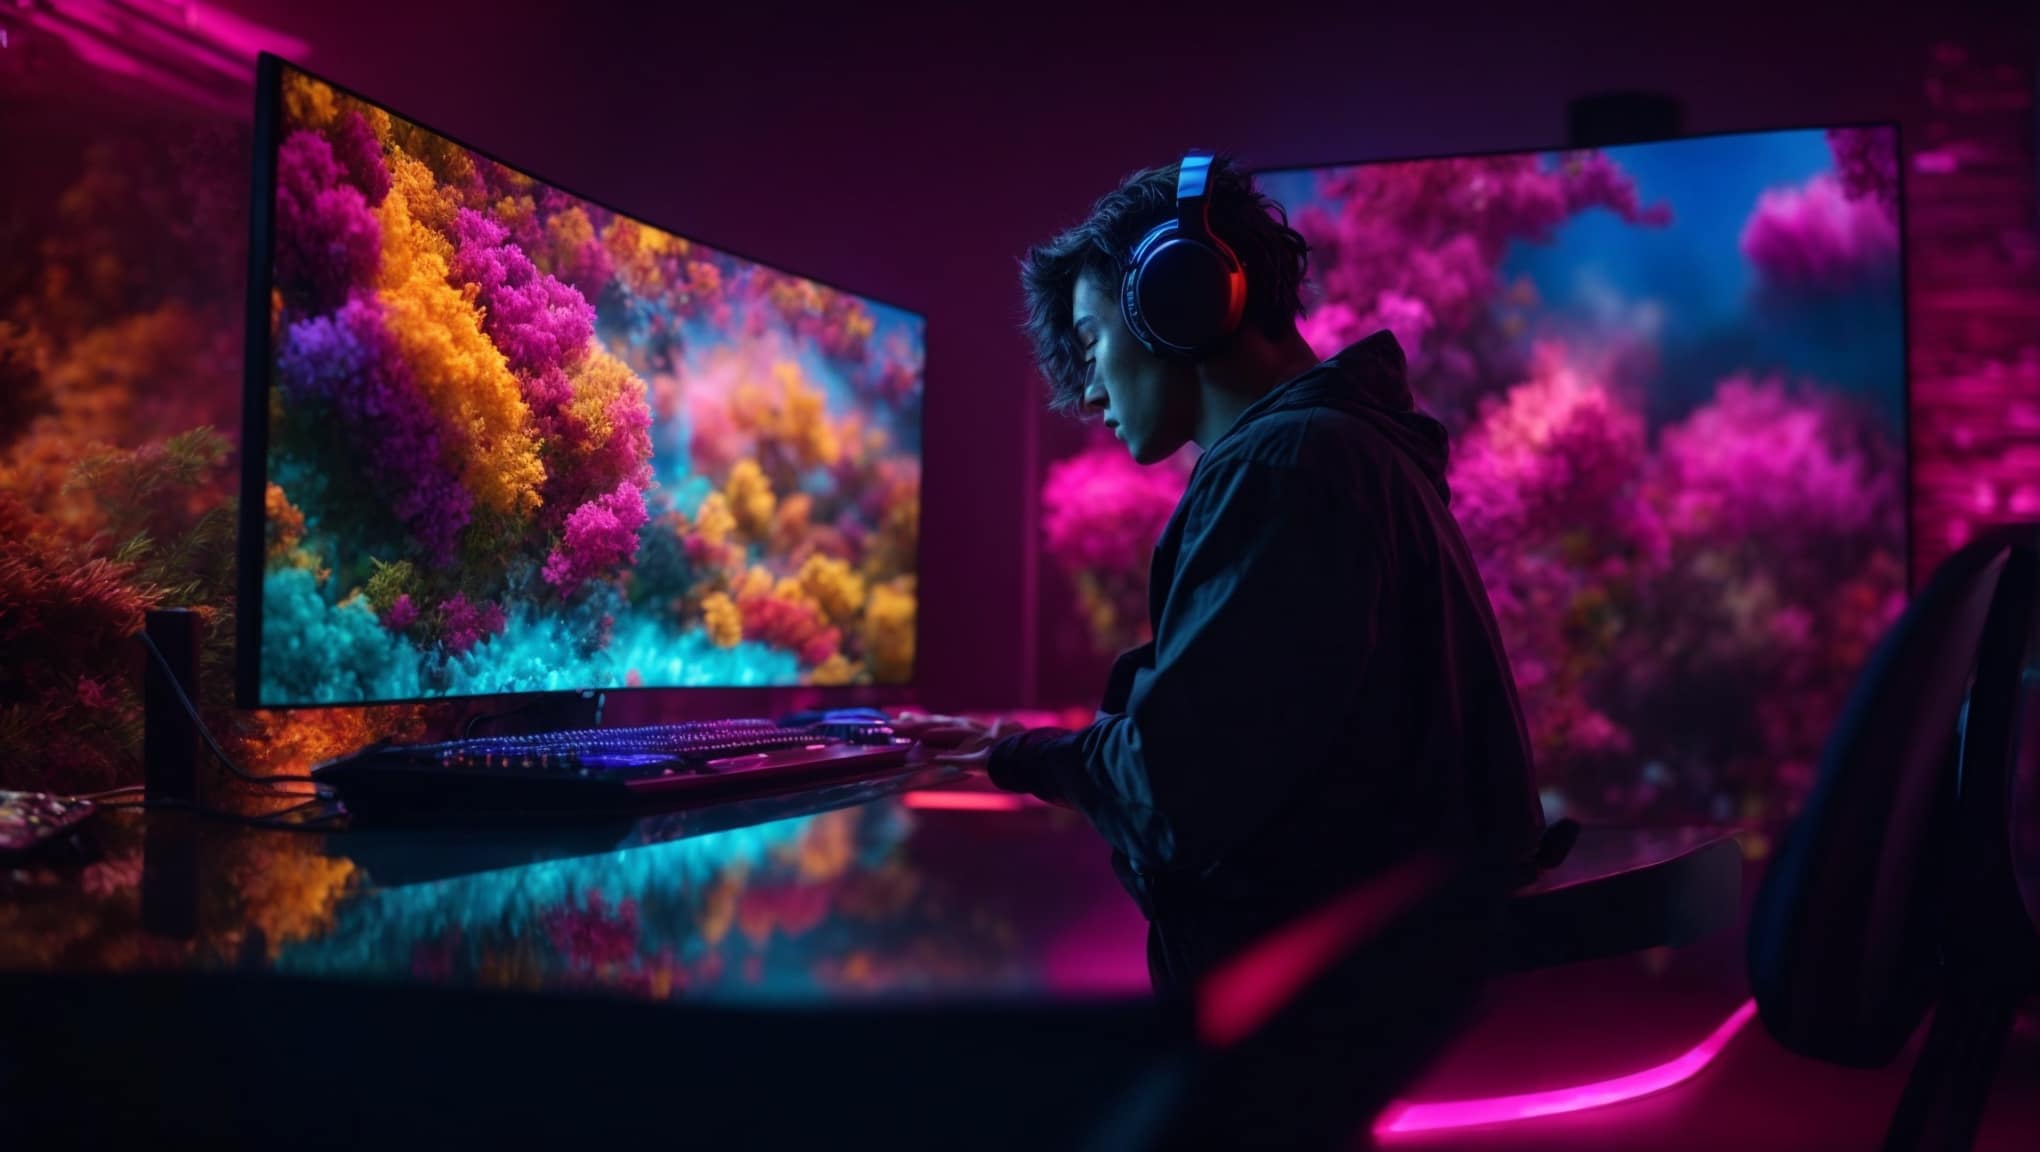 "The 48" LG UltraGear 4K OLED Gaming Monitor: A Glimpse into the Next Level of Gaming" | FinOracle